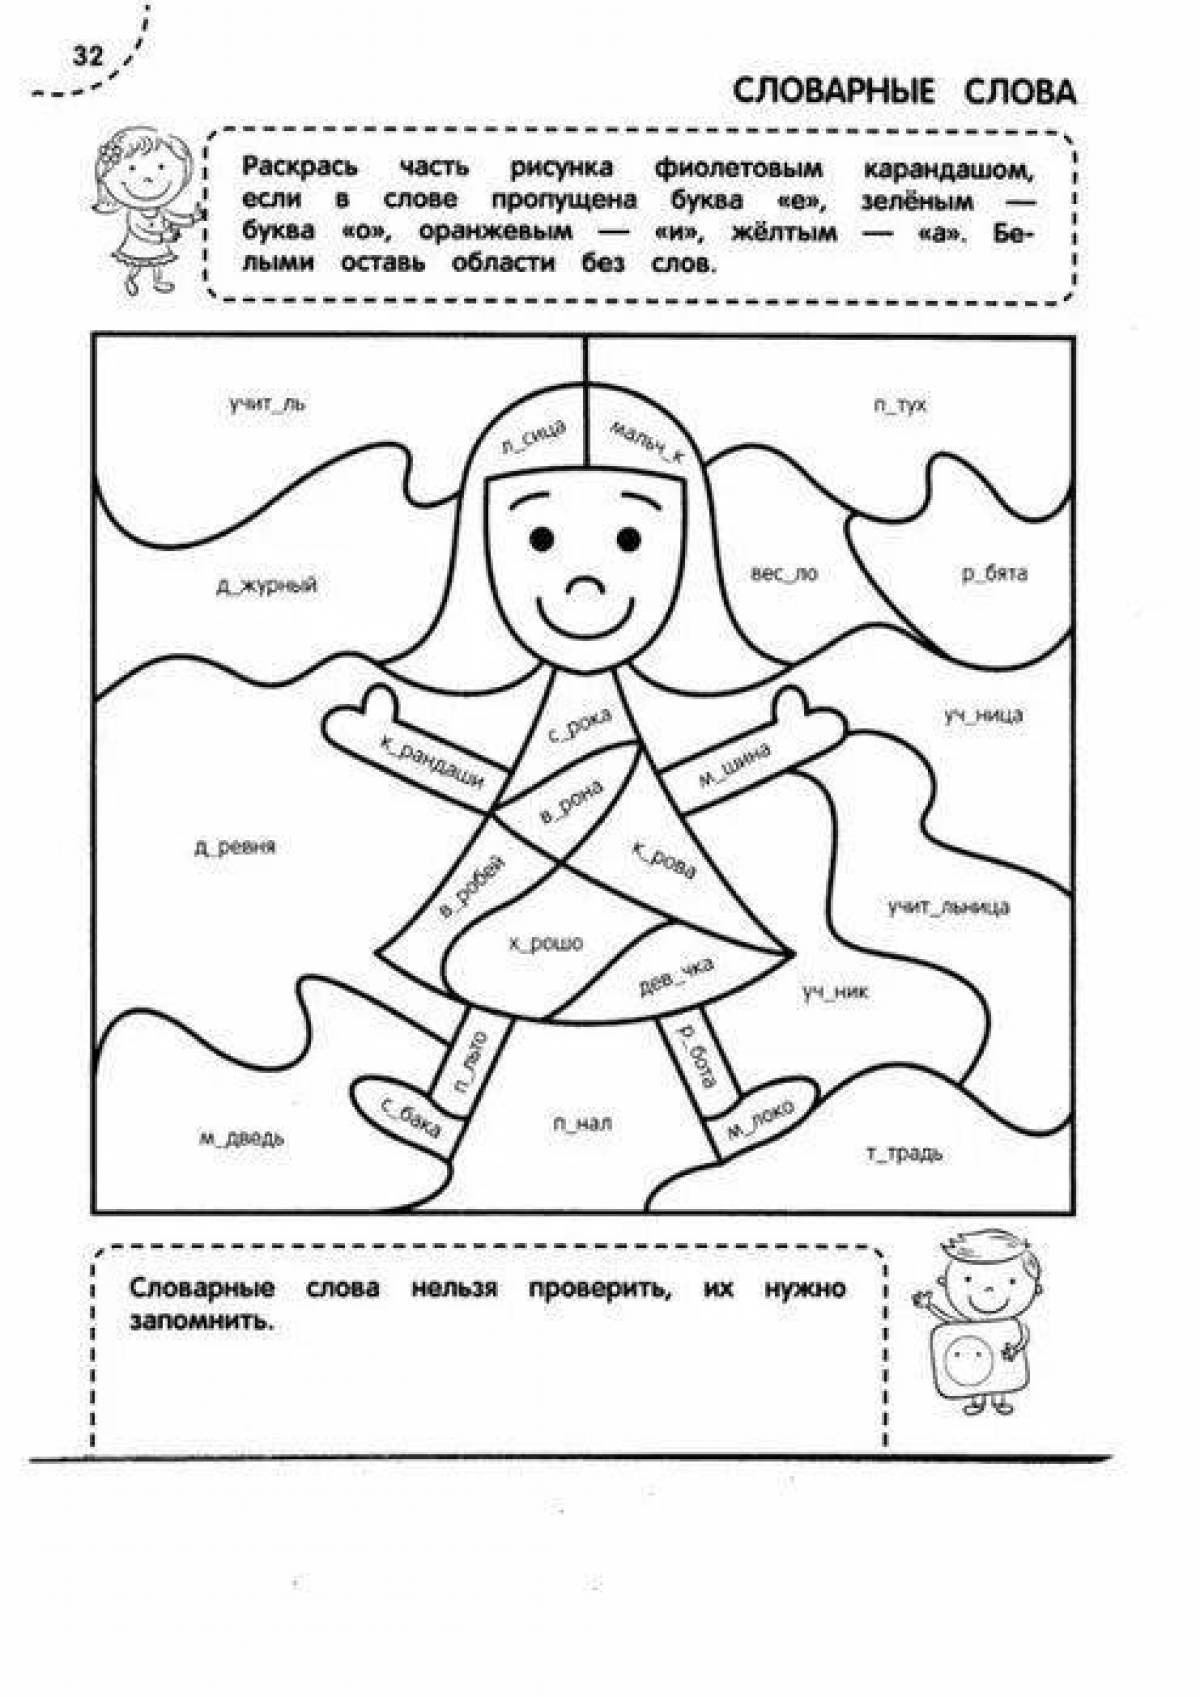 Coloring Page for Complex Practice Equipment